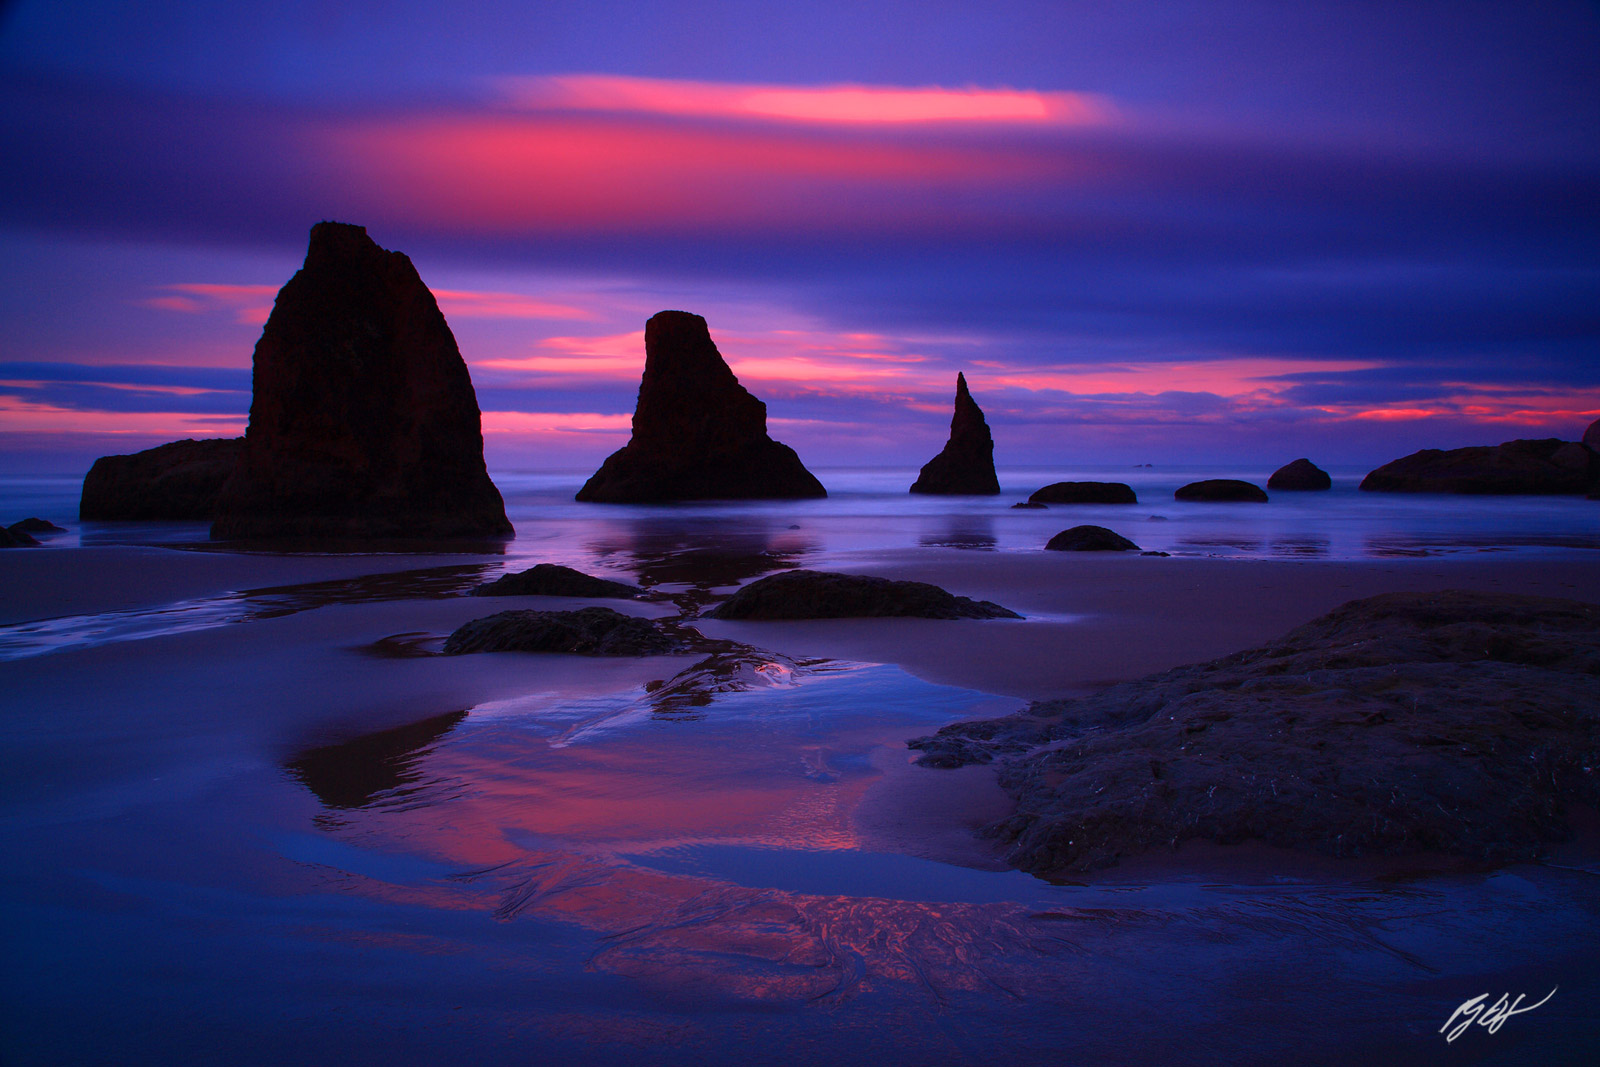 Sunrise and Sea Stacks from Face Rock Beach in Bandon Oregon